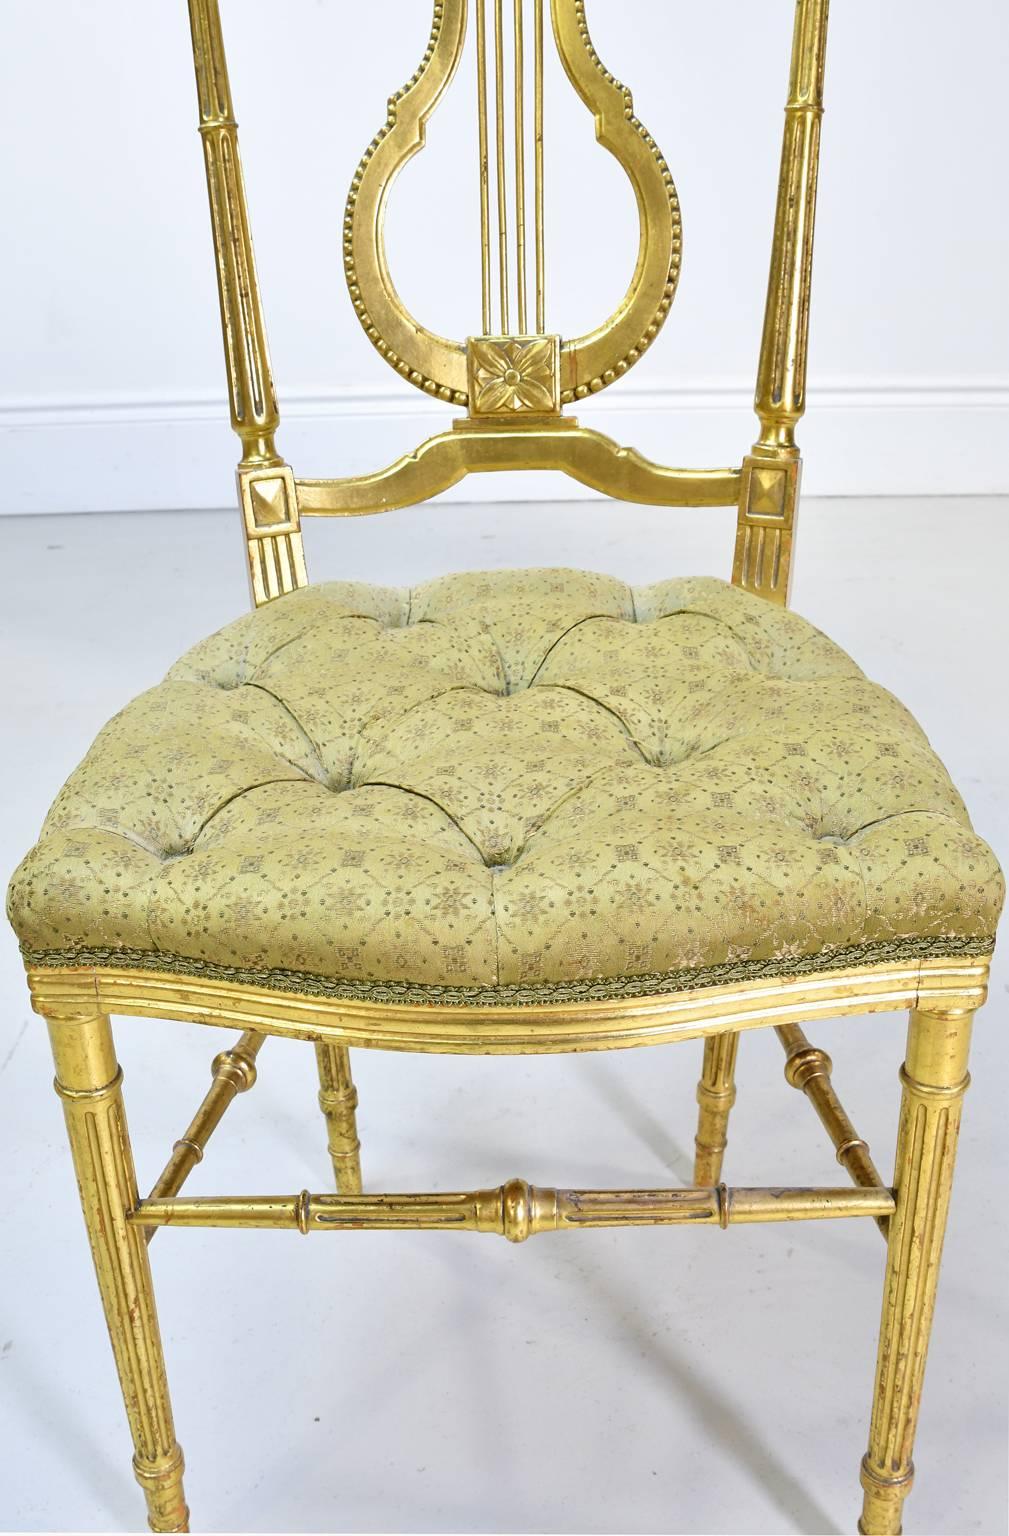 20th Century Gilded Louis XVI Style Chair w/ Lyre-Back & Upholstered Seat, France, ca. 1910